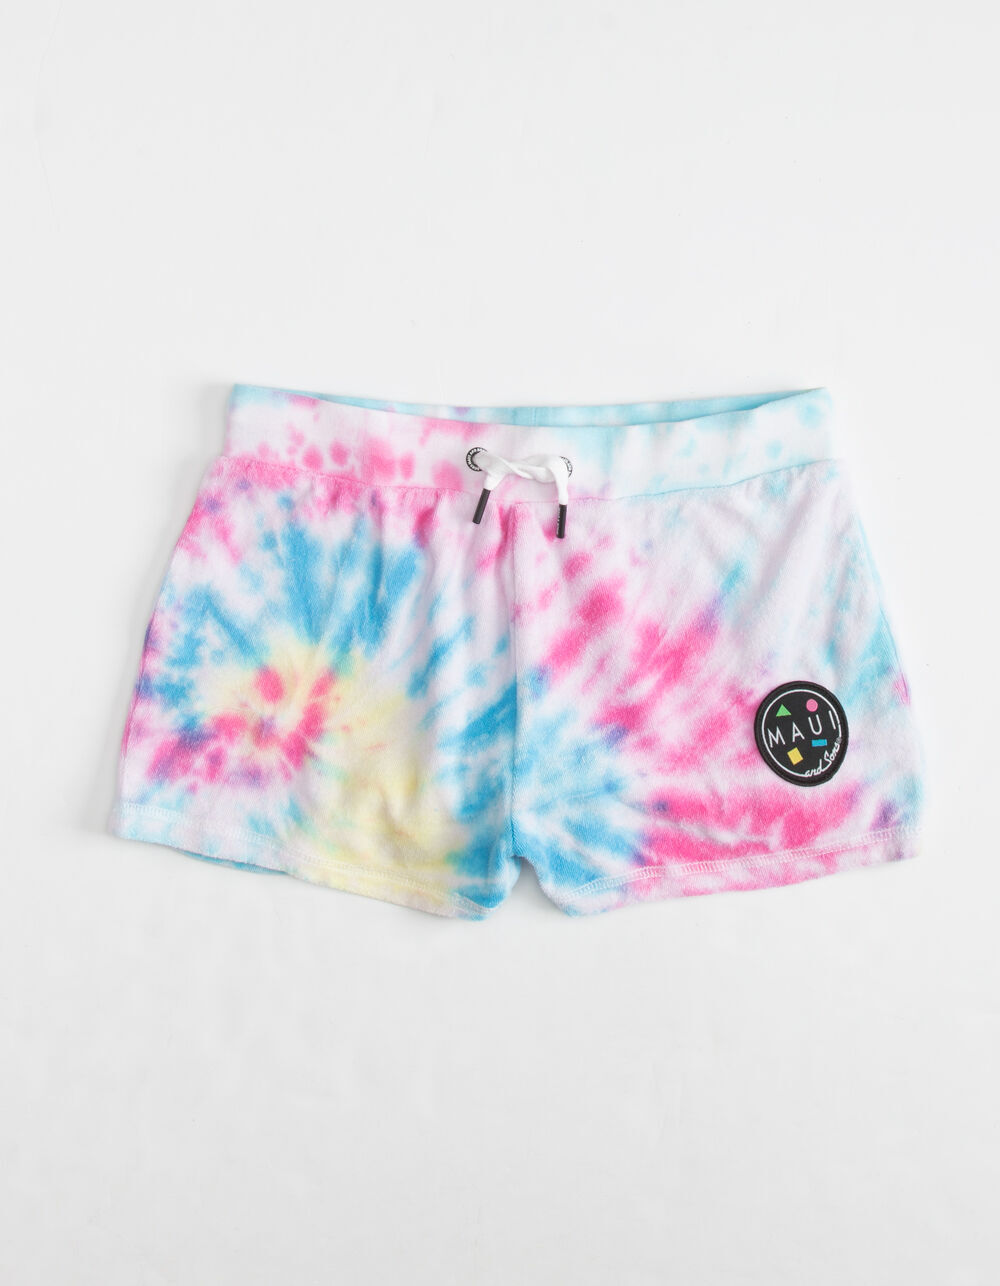 MAUI AND SONS Tie Dye Girls Terry Shorts - MULTI | Tillys